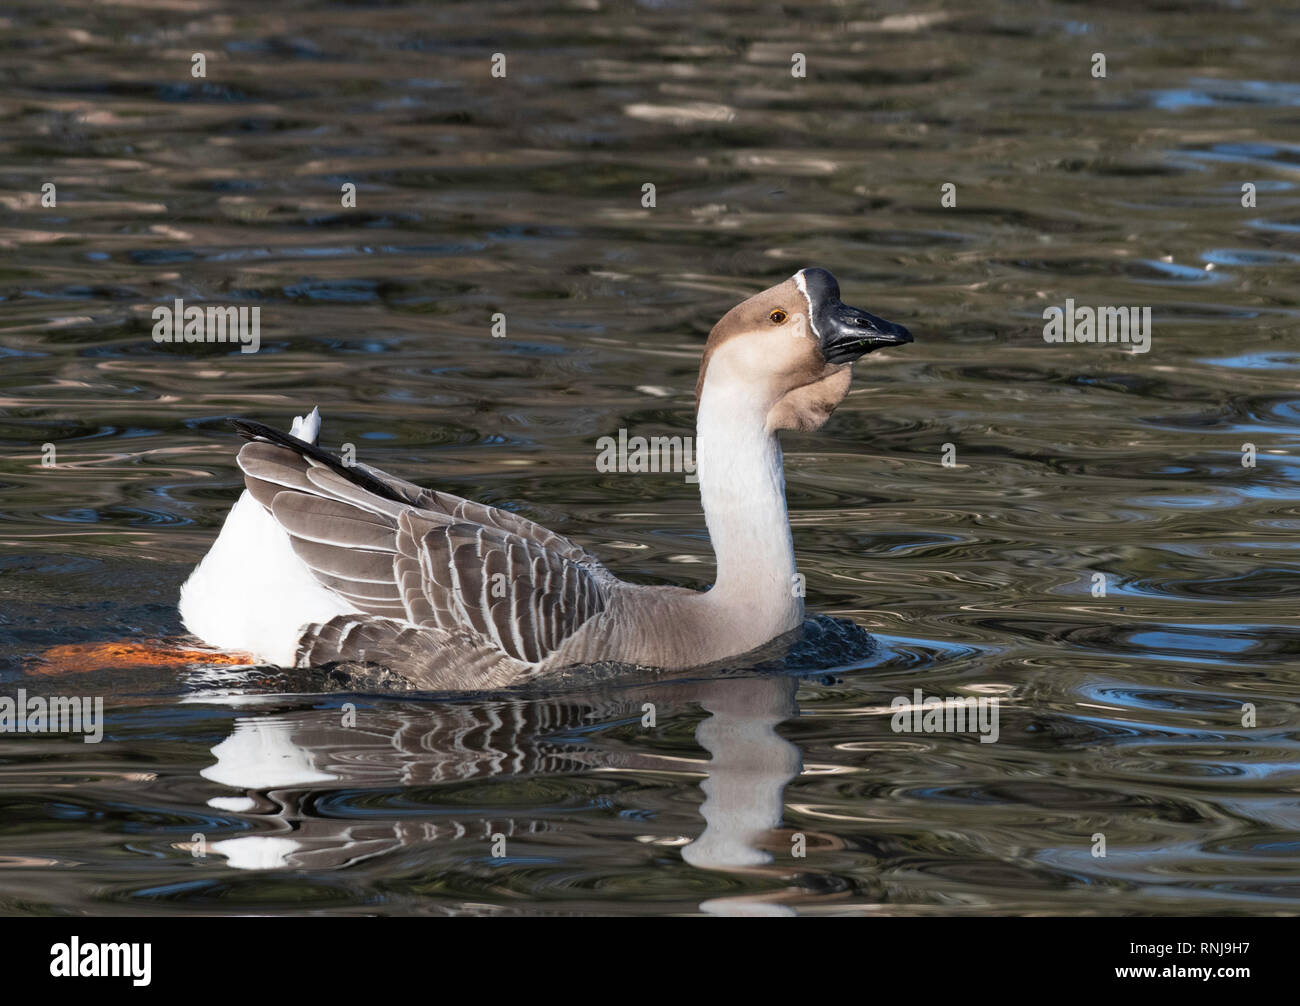 A Chinese goose, Anser cygnoides, swims in a duck pond in Shreveport, La. Stock Photo